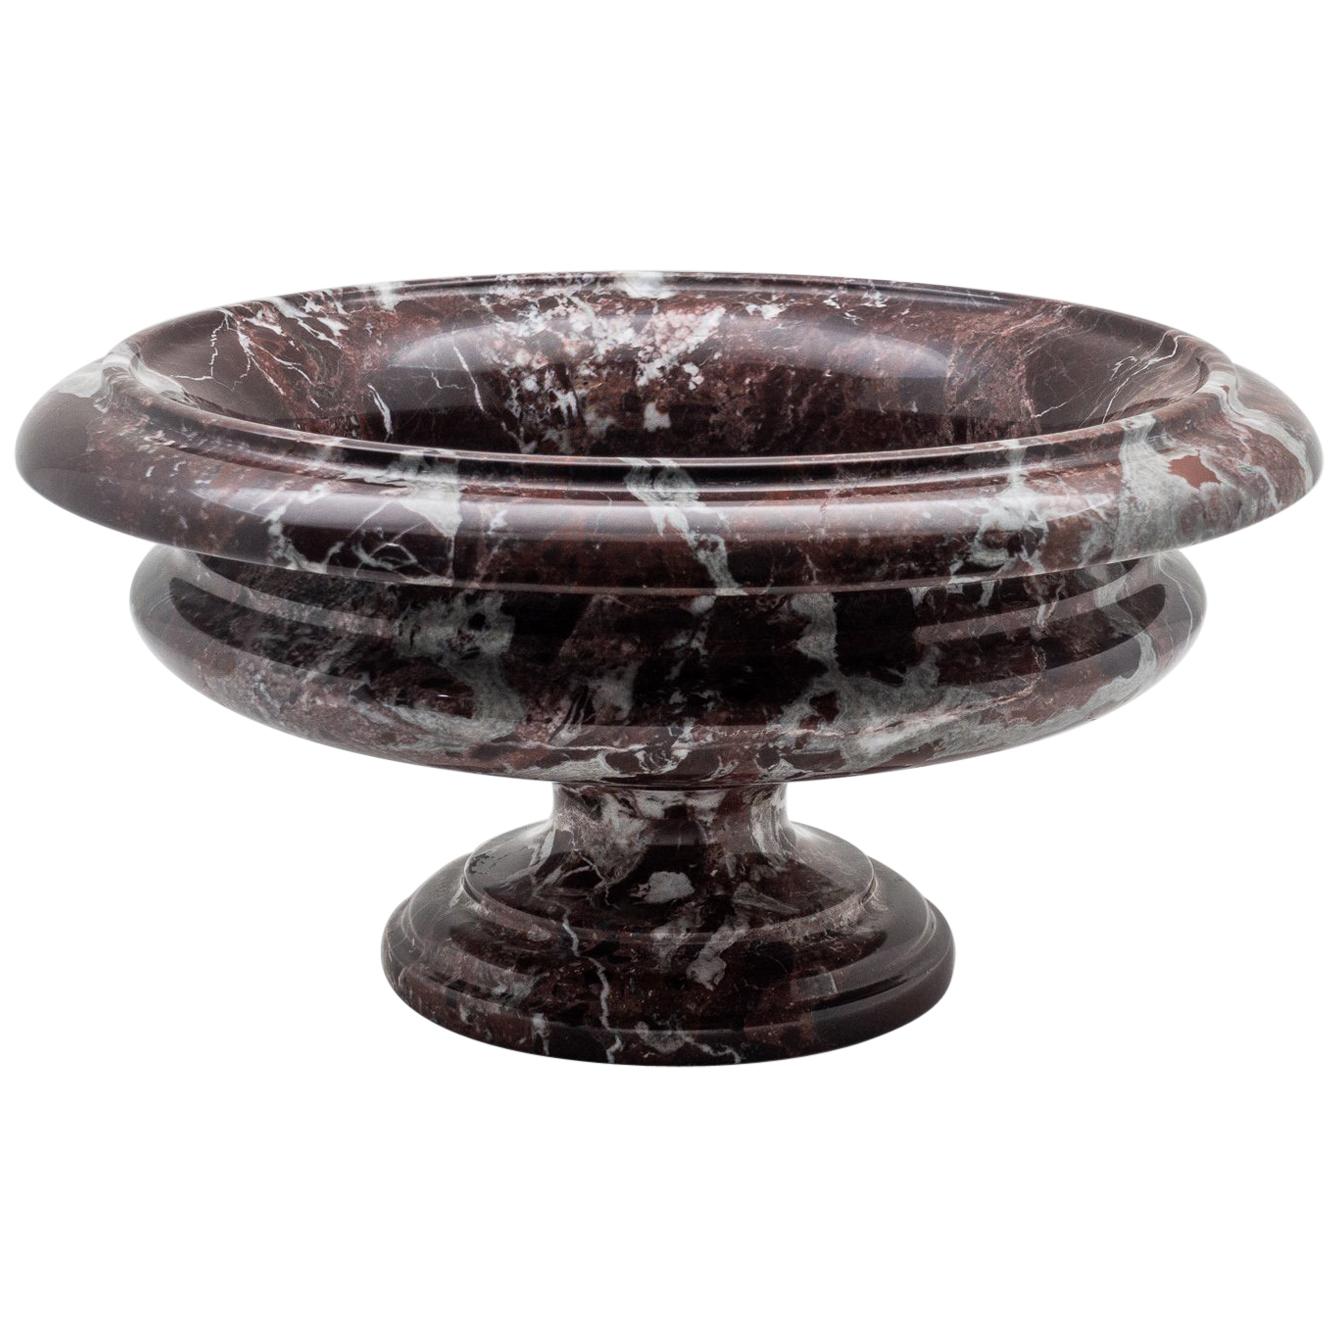 Large Circular Neoclassical Bordeaux Colored Marble Urn